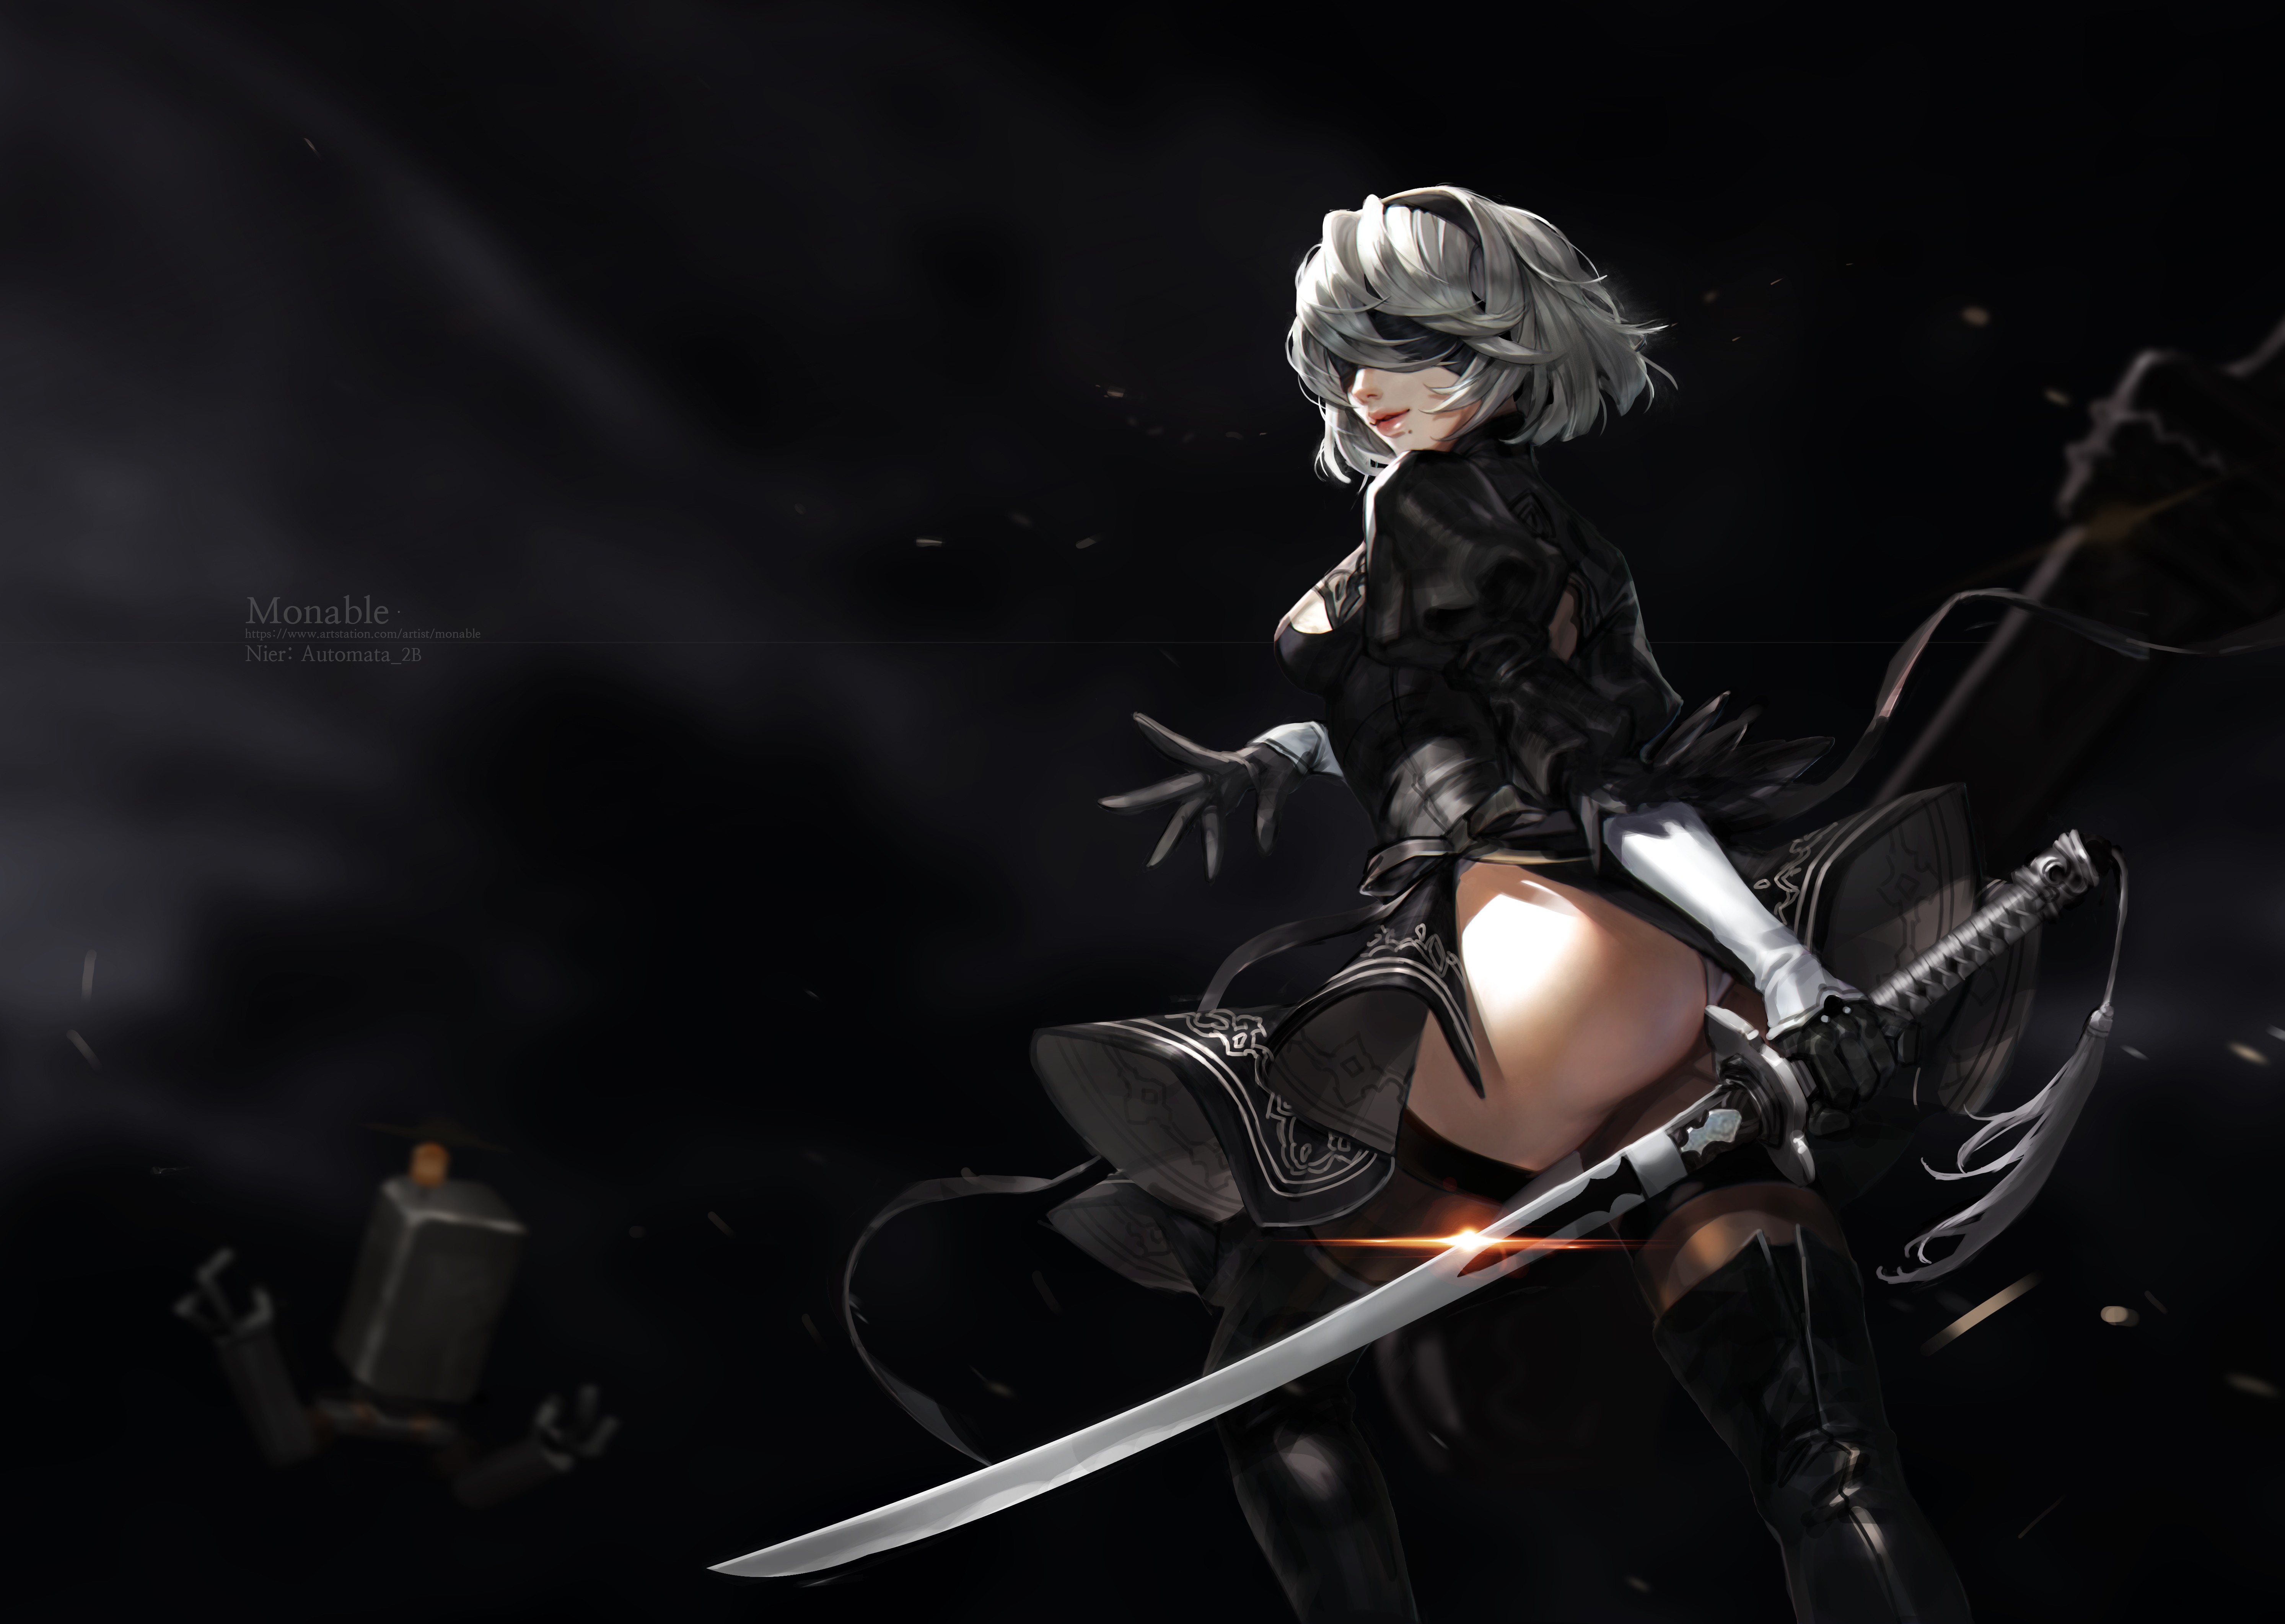 Live Wallpapers tagged with Nier